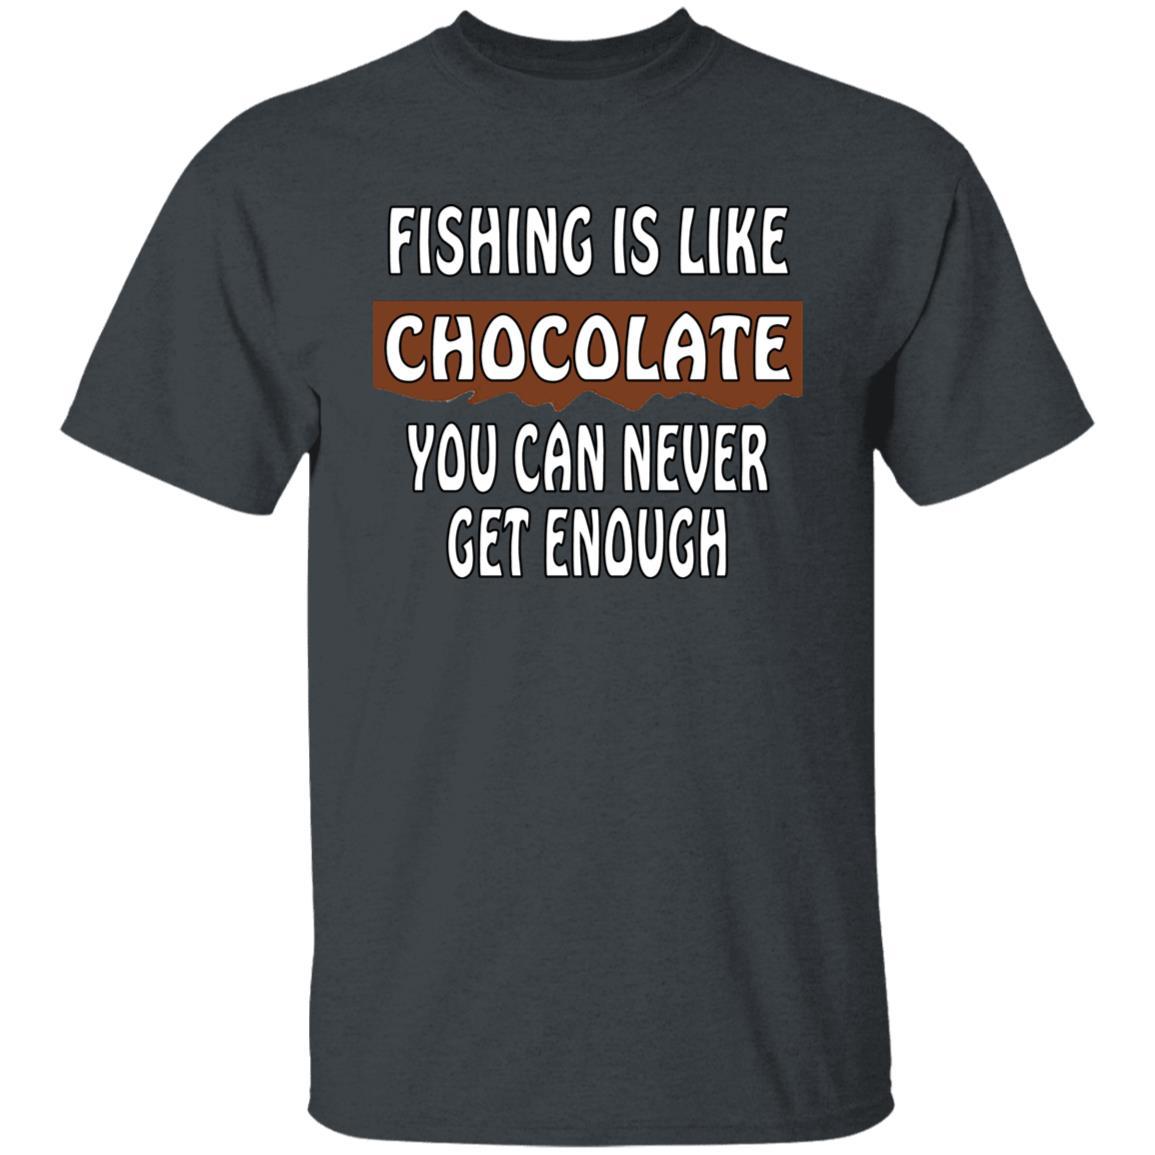 Fishing is like chocolate you can never get enough t-shirt dark-heather